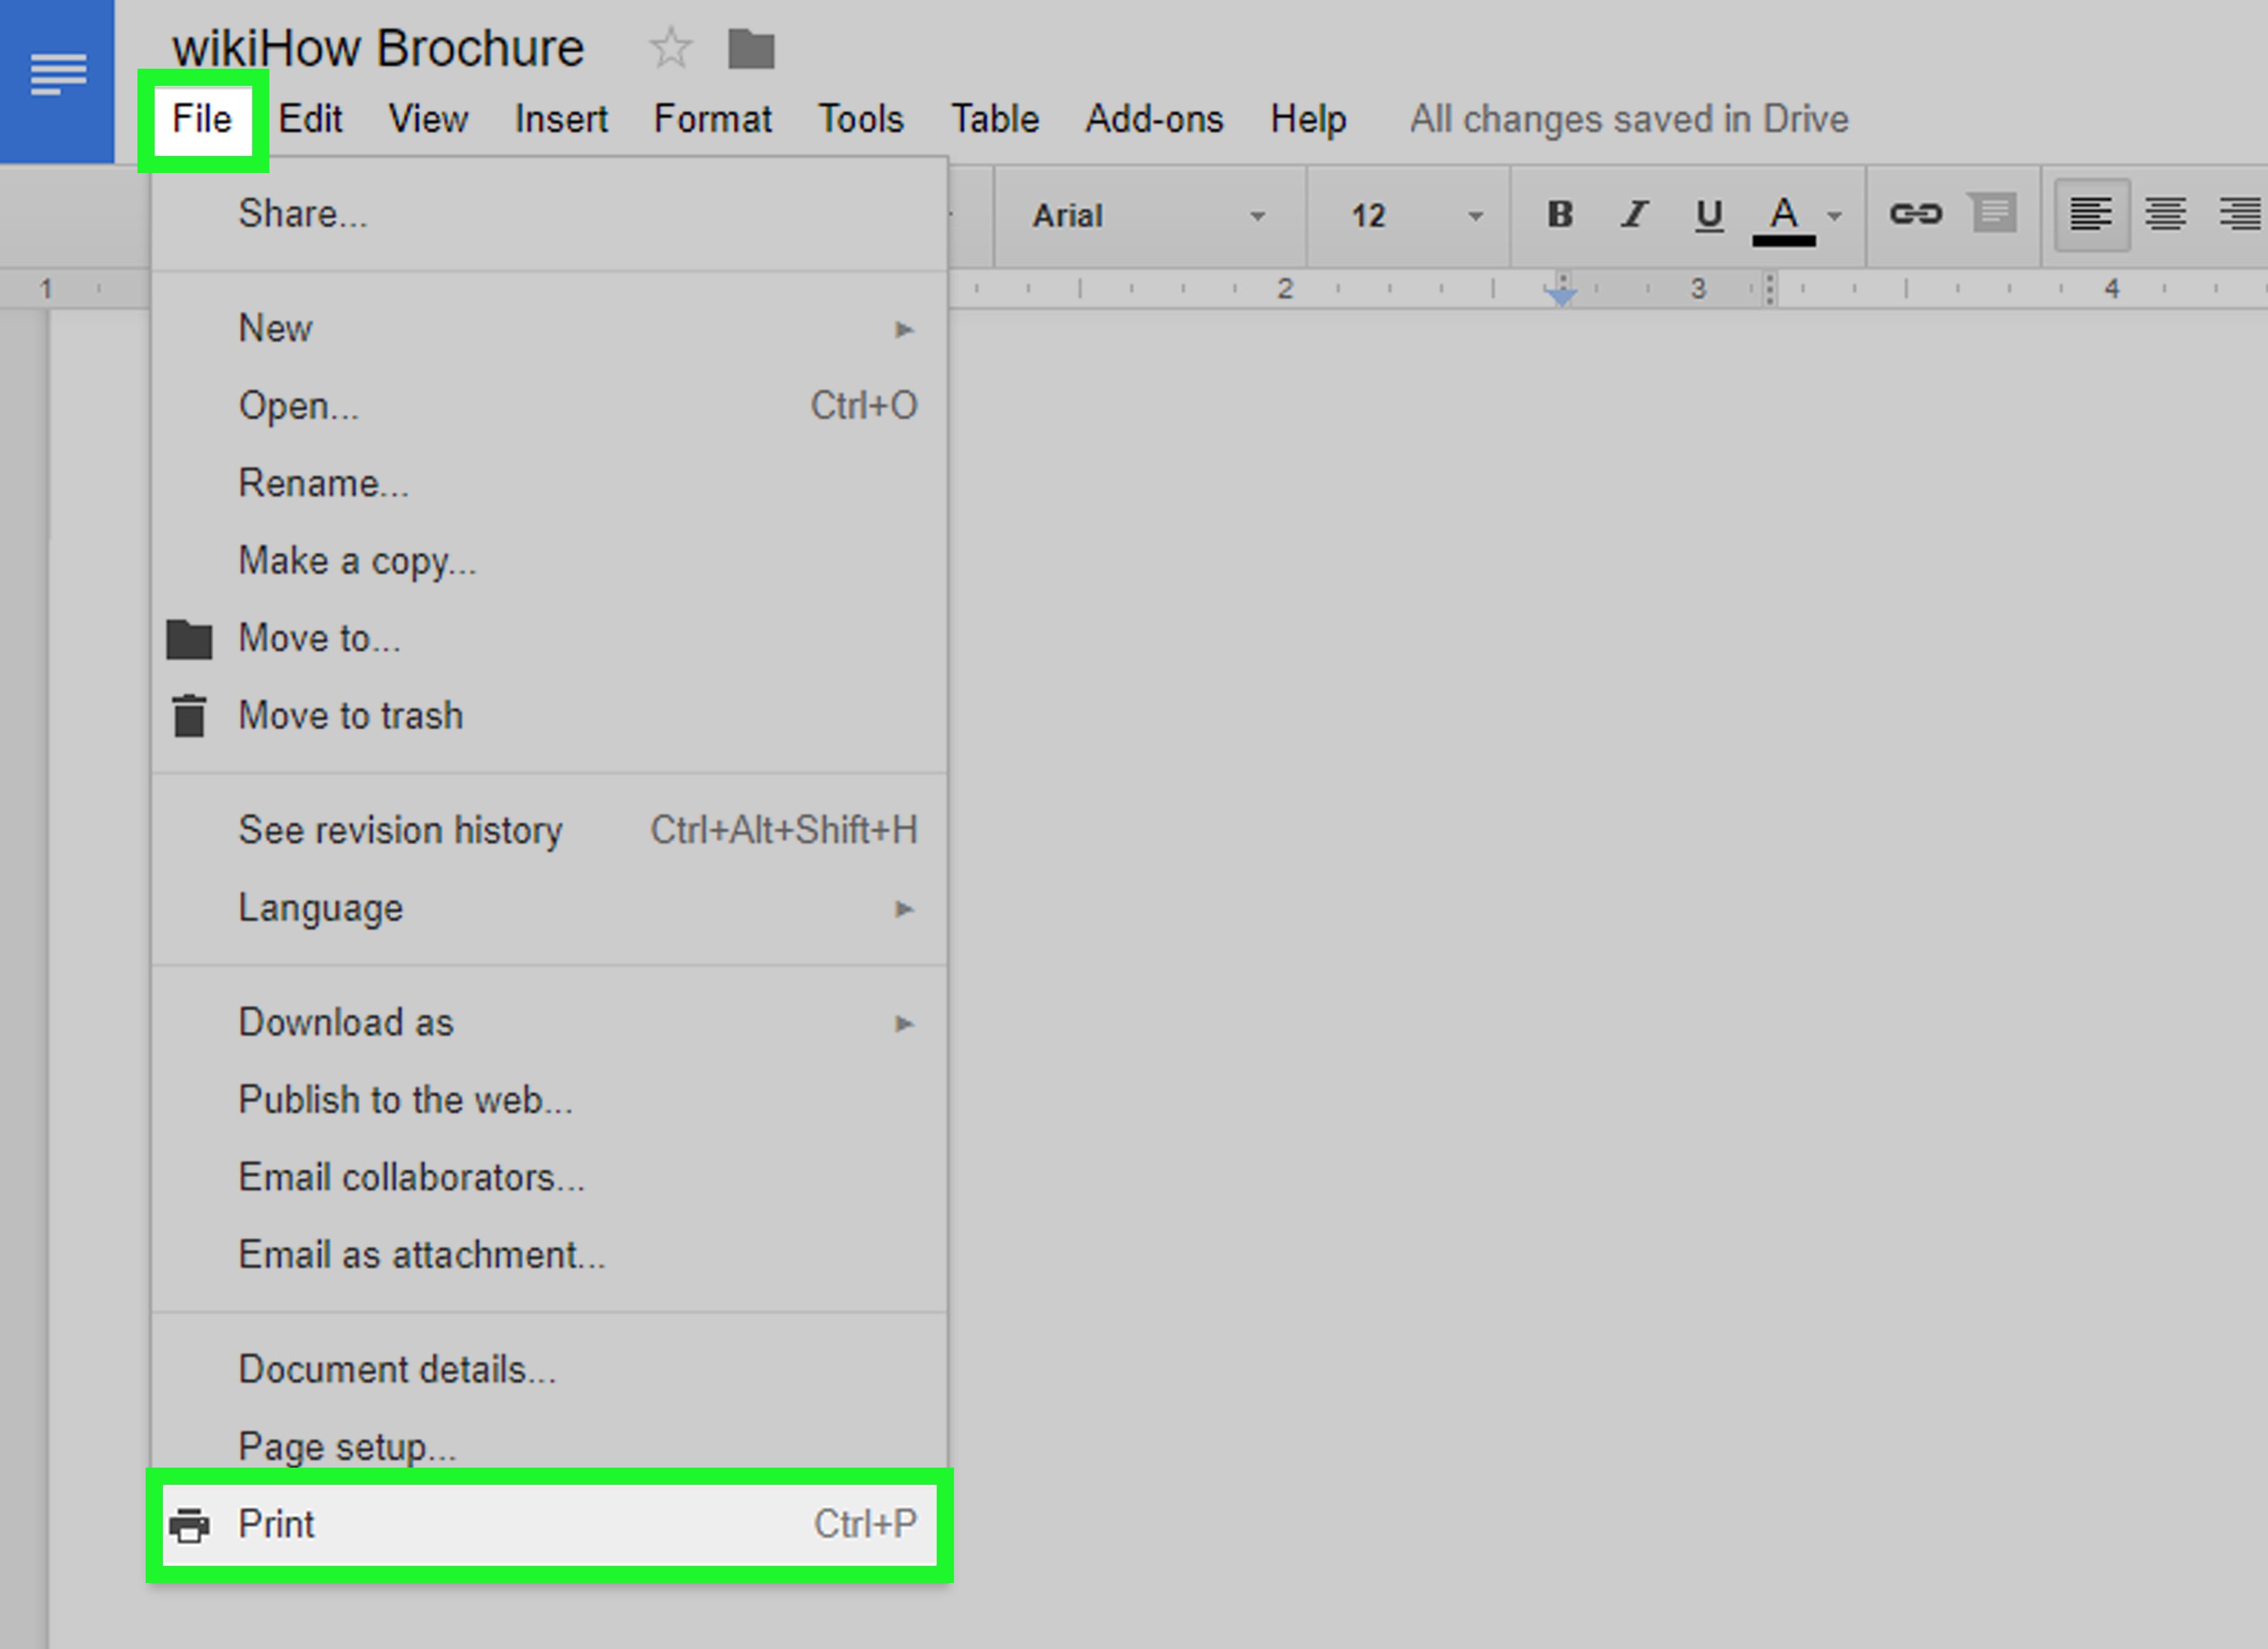 How to Make a Brochure Using Google Docs wikiHow